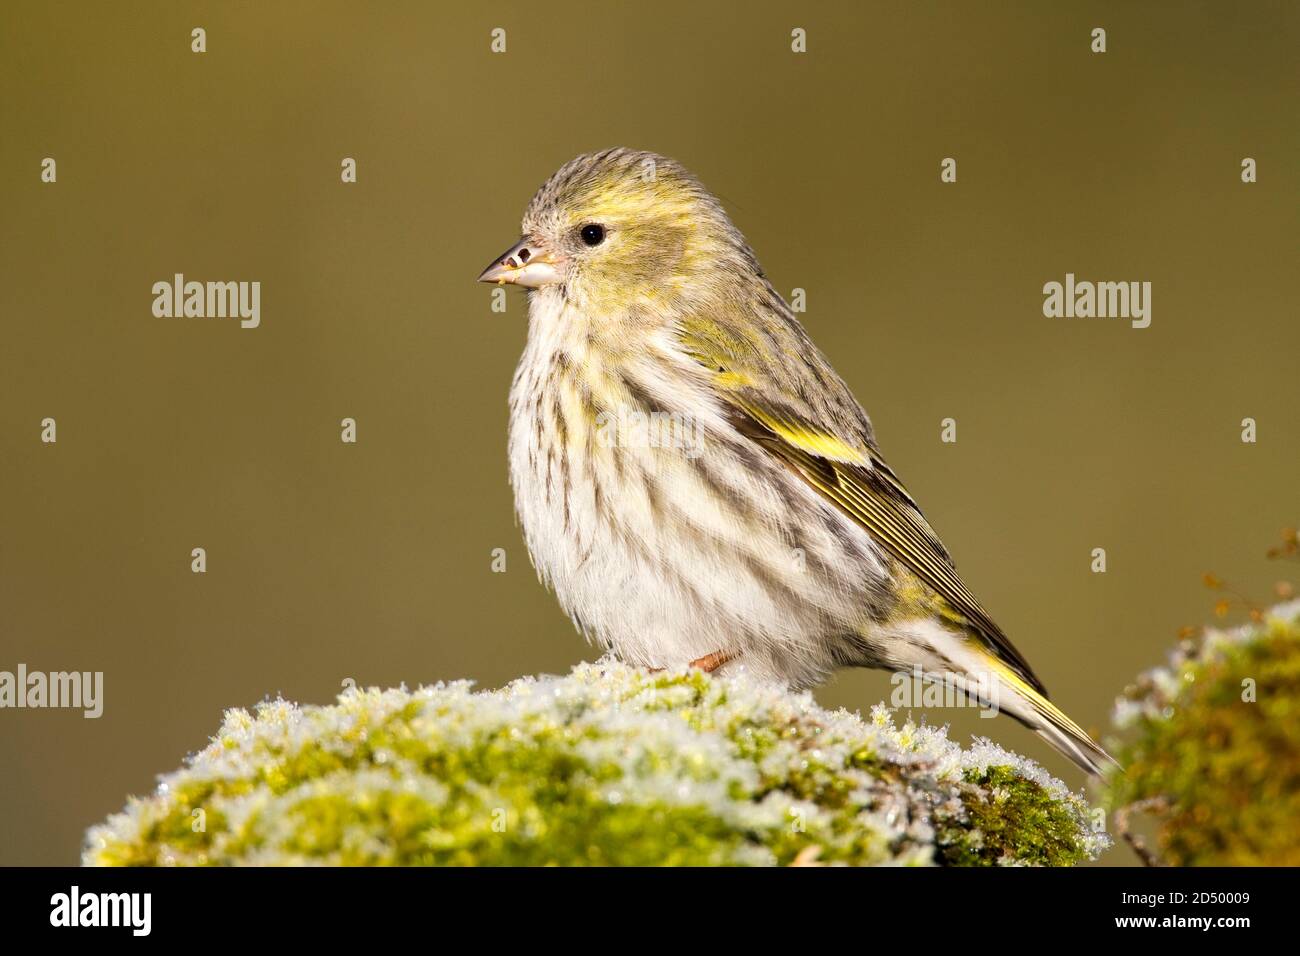 spruce siskin (Spinus spinus, Carduelis spinus), female perched on a rock with moss, Spain Stock Photo